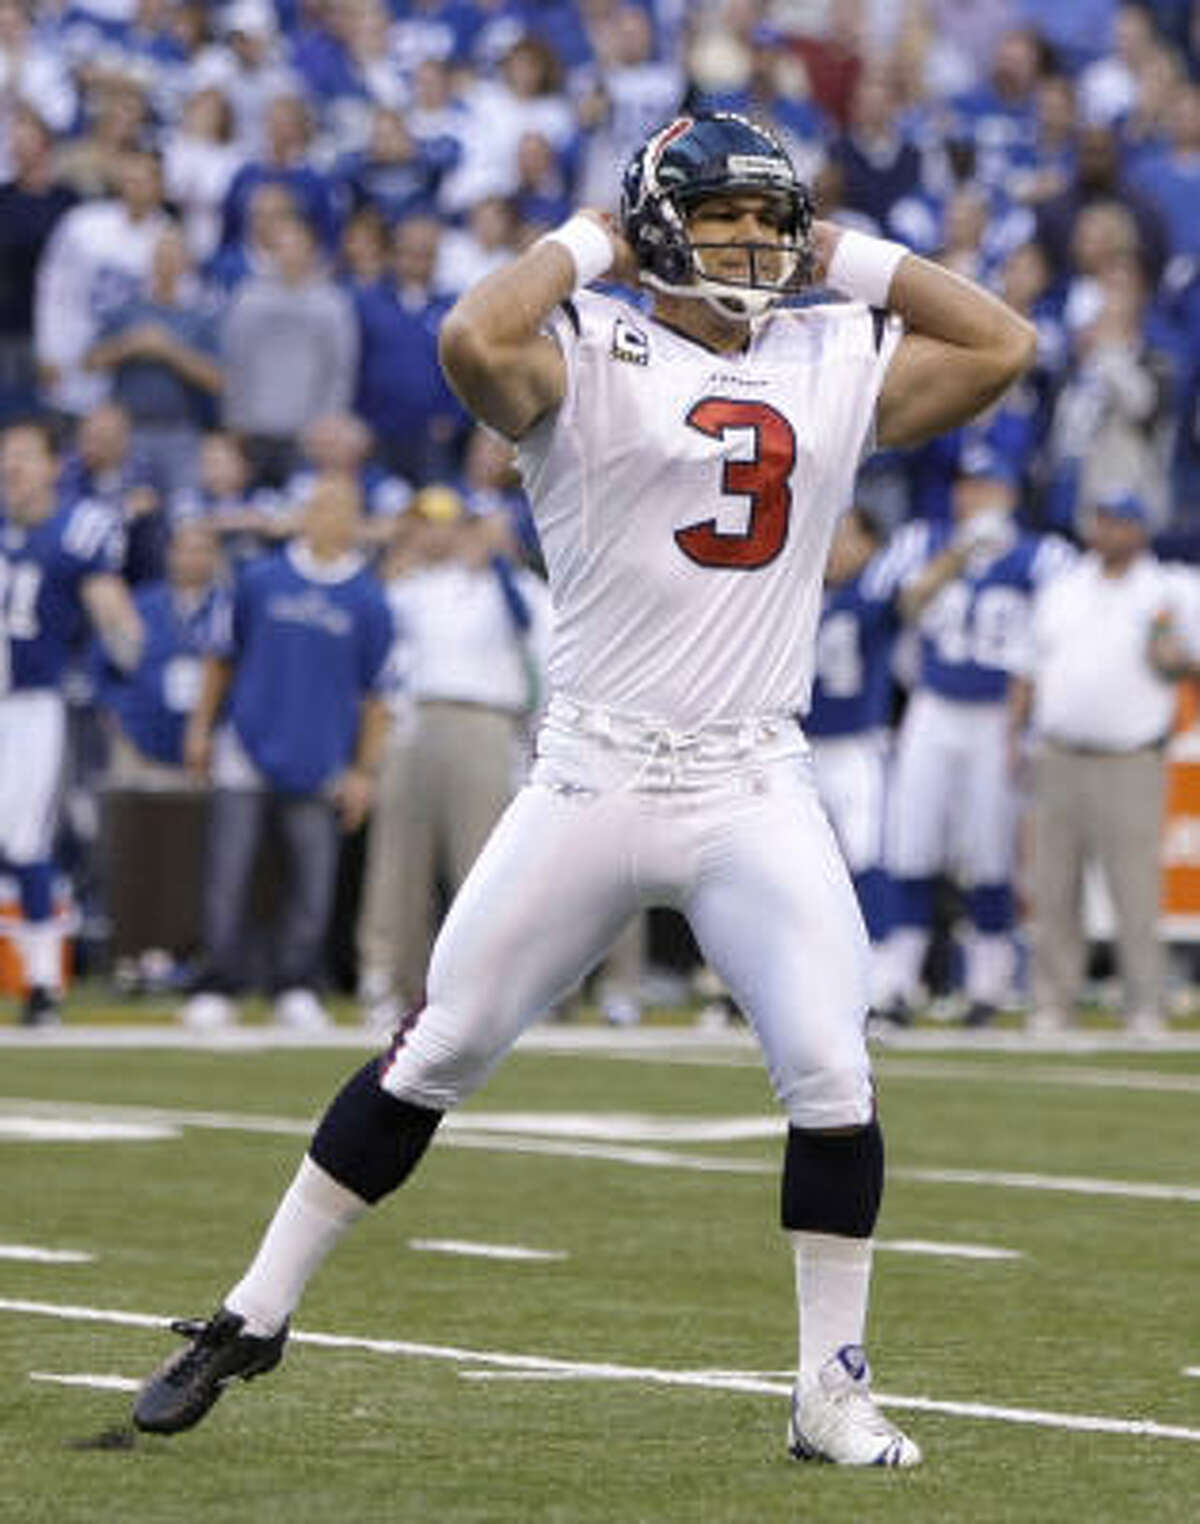 3. Who will win the kicking competition between Kris Brown and Neil Rackers? Brown (above), who enters his 12th season, missed 11 field goals last season, including three short ones that were blocked. He missed two that would have forced overtime in three-point losses to Indianapolis and Tennessee. He’s the last original Texan, and he’s established in the community. This is the first time his job has been threatened. Neil Rackers, an 11-year veteran, missed one field goal at Arizona, but the Cardinals wouldn’t give him $2 million a year. He had a job lined up with the Jets, but general manager Rick Smith convinced him to compete with Brown. Both kickers have strong legs. Special teams coordinator Joe Marciano has been staying away devising ways for them to compete against each other. A decision might not be made until the last roster reduction.